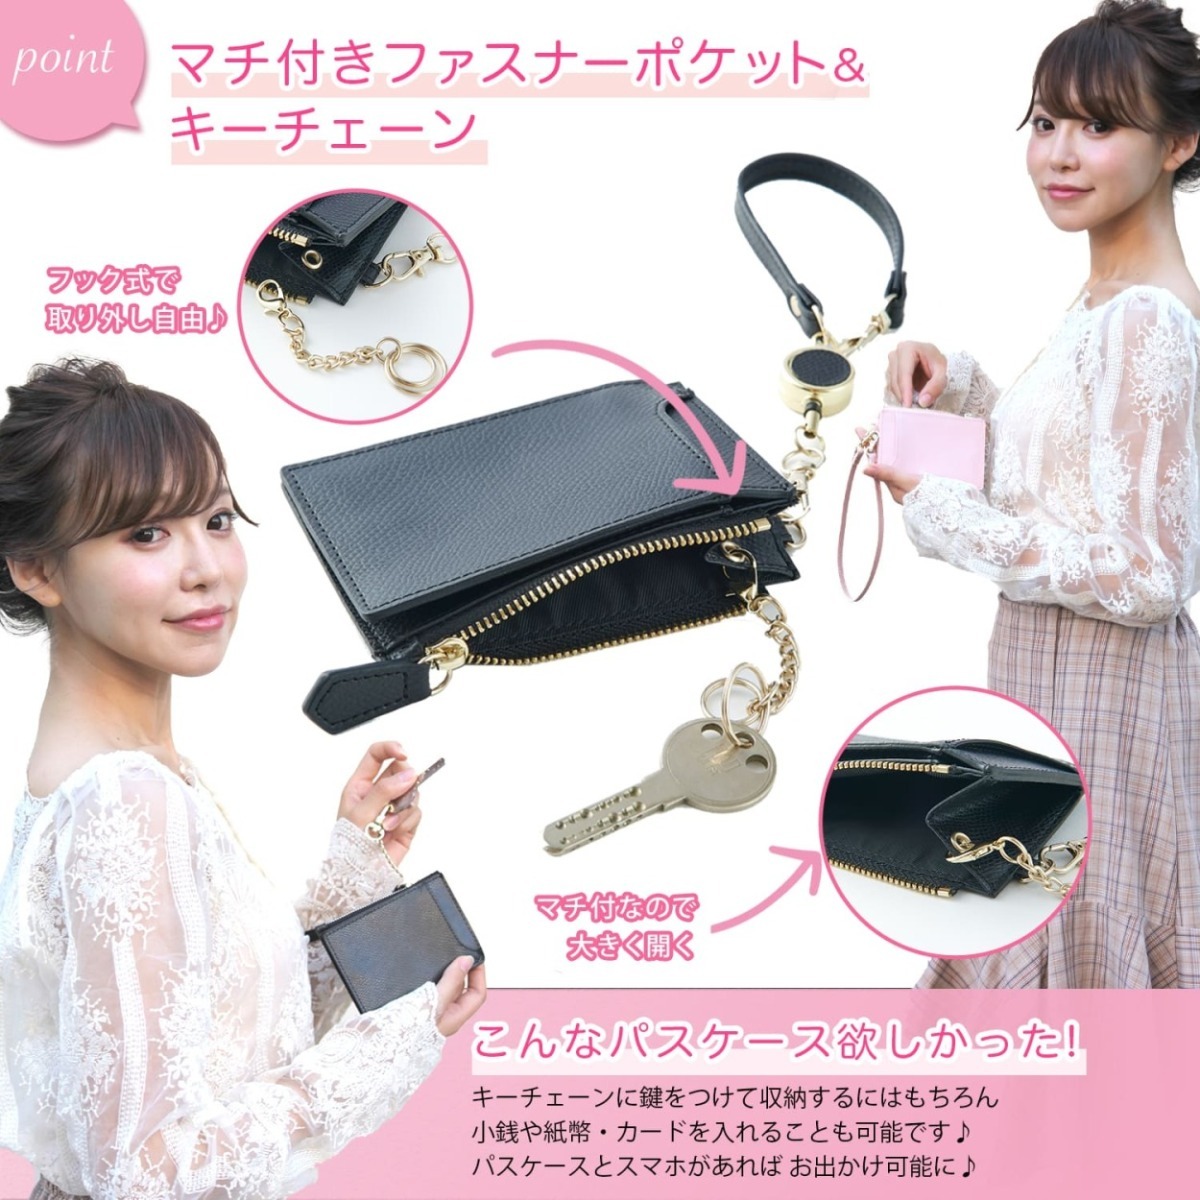  pass case ticket holder lady's folding in half original leather card-case reel attaching key chain change purse . thin type SUICA IC card ID license proof GRAV